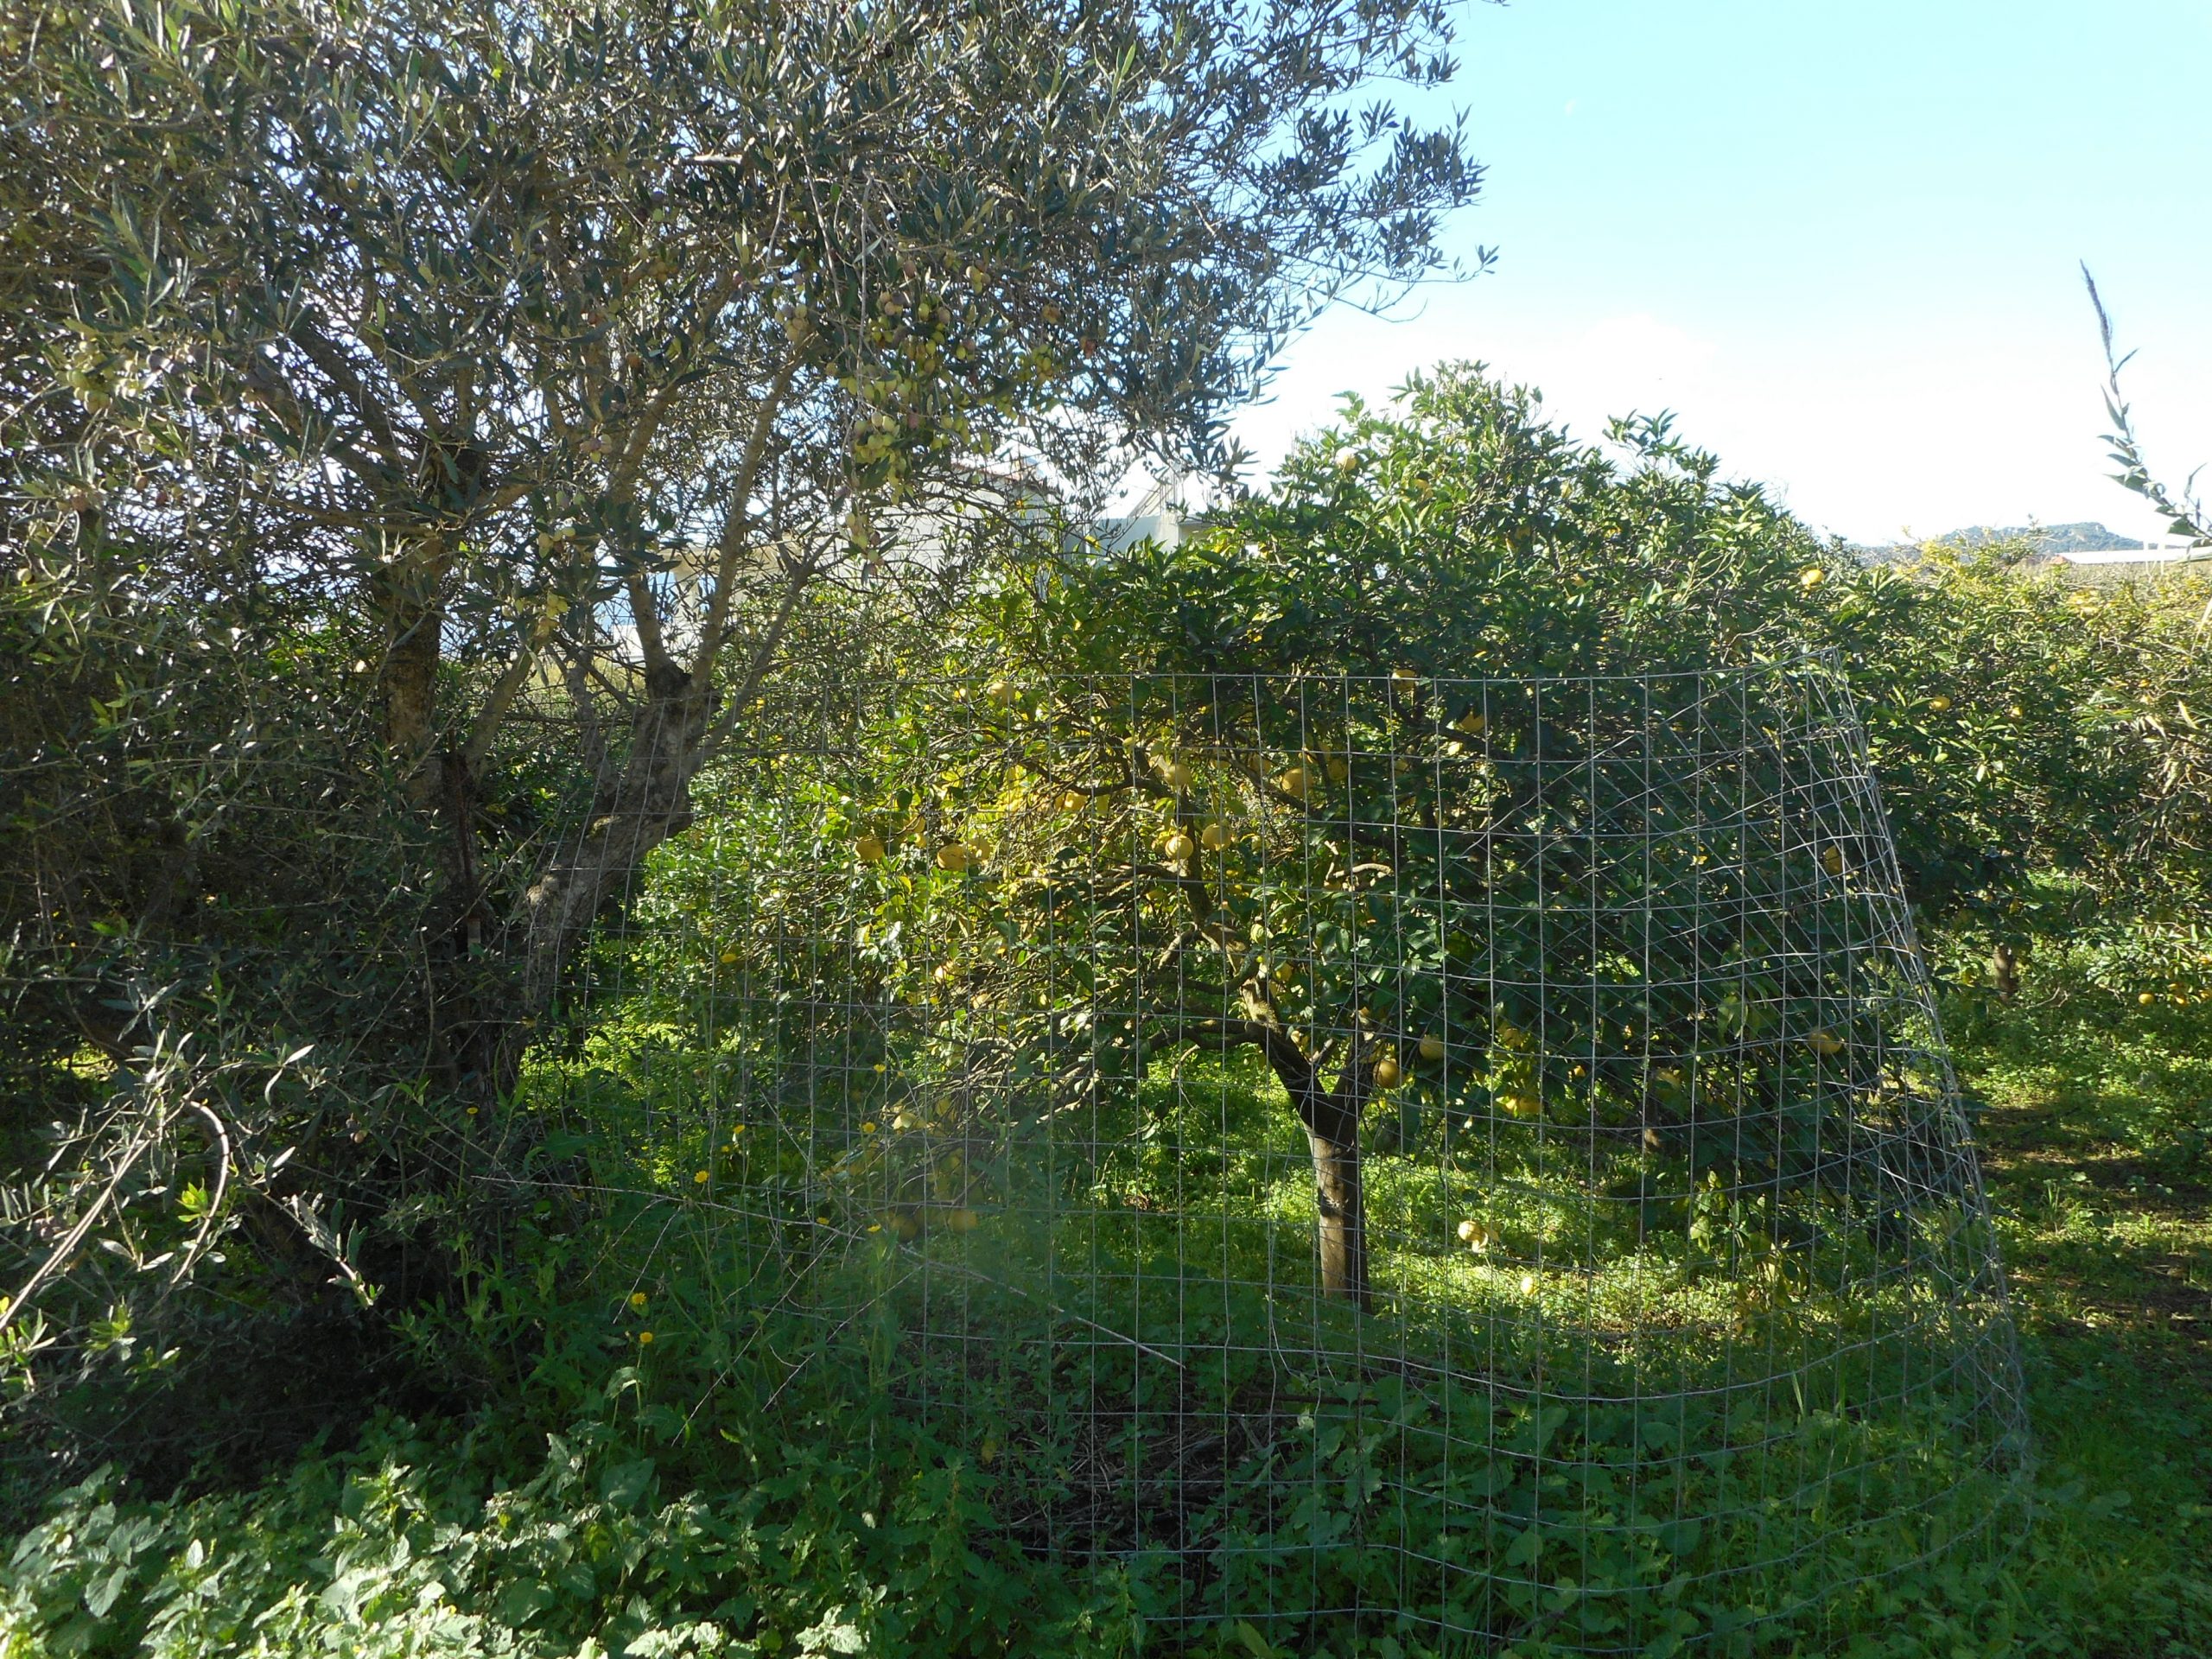 Plot of 1,800 sq.m. in the area of ​​Agia-Chania with citrus fruits.